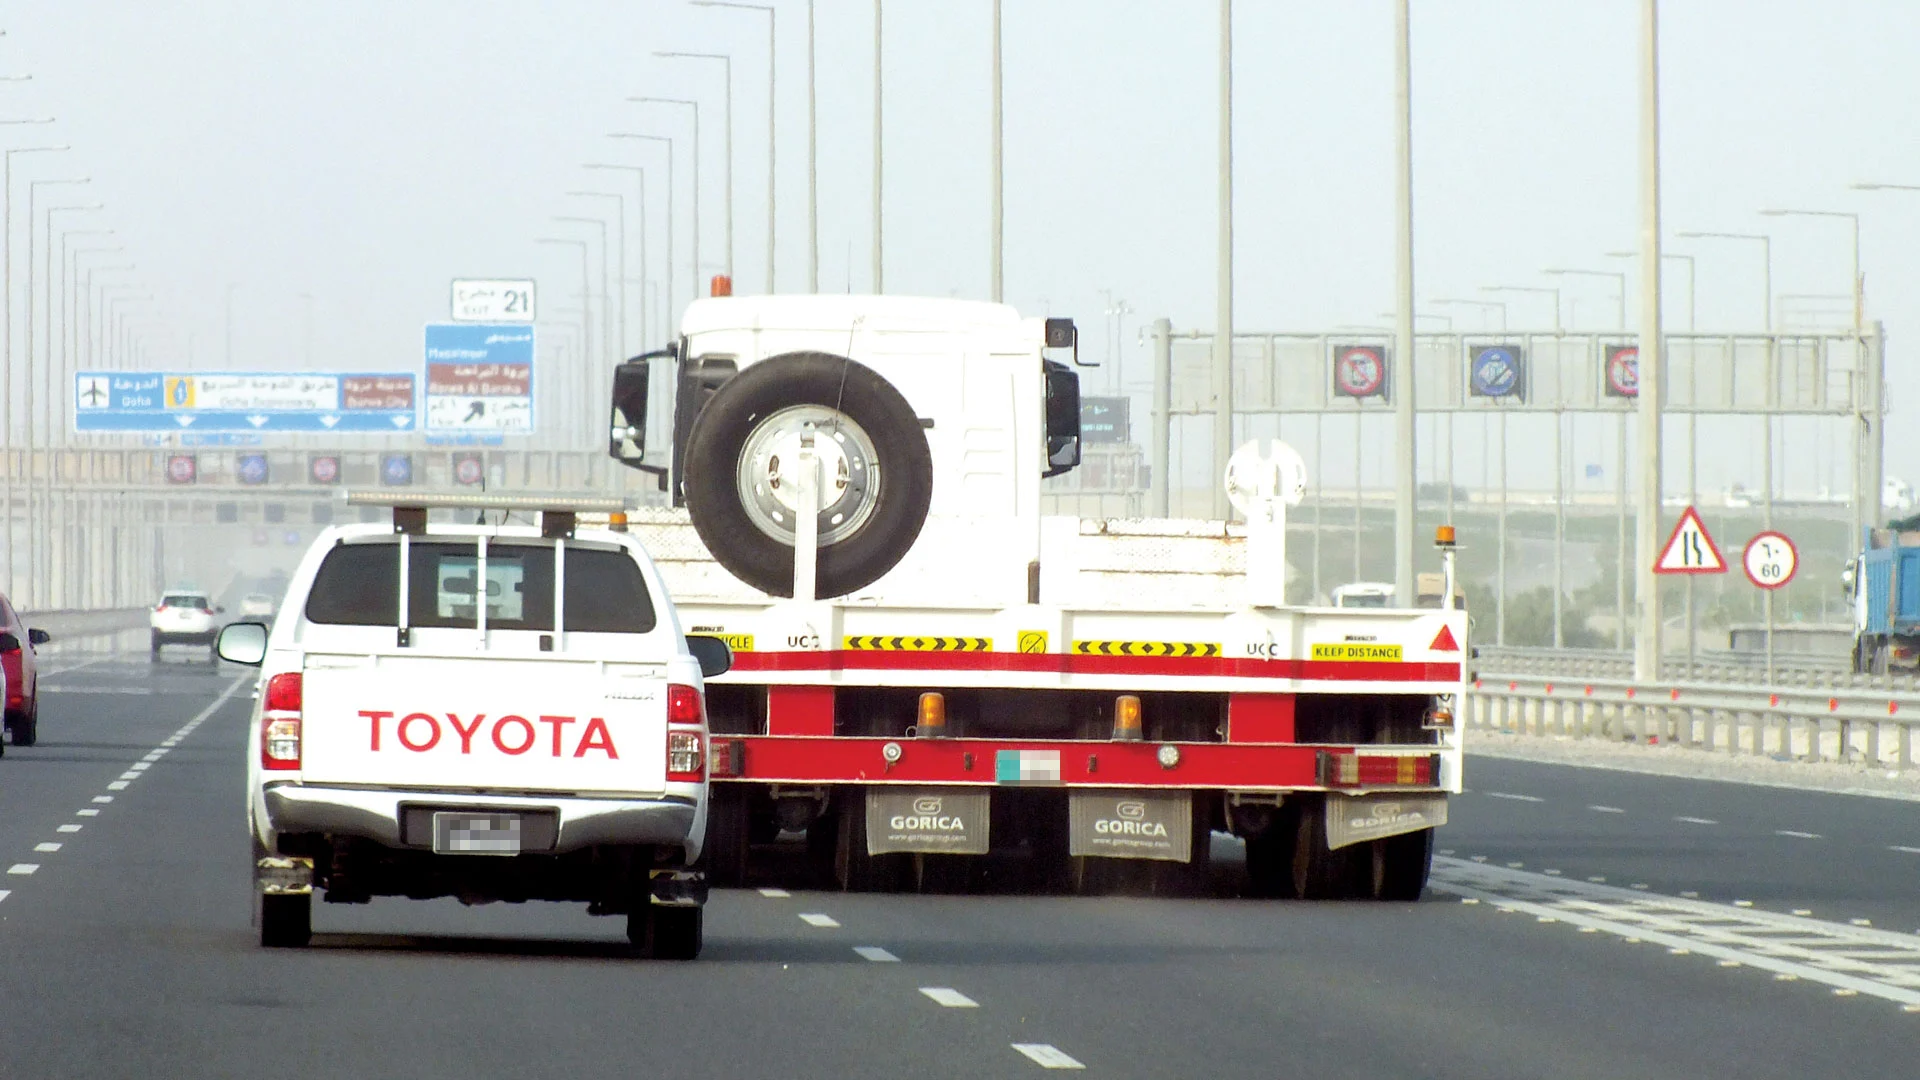 Large trucks are obstructing traffic